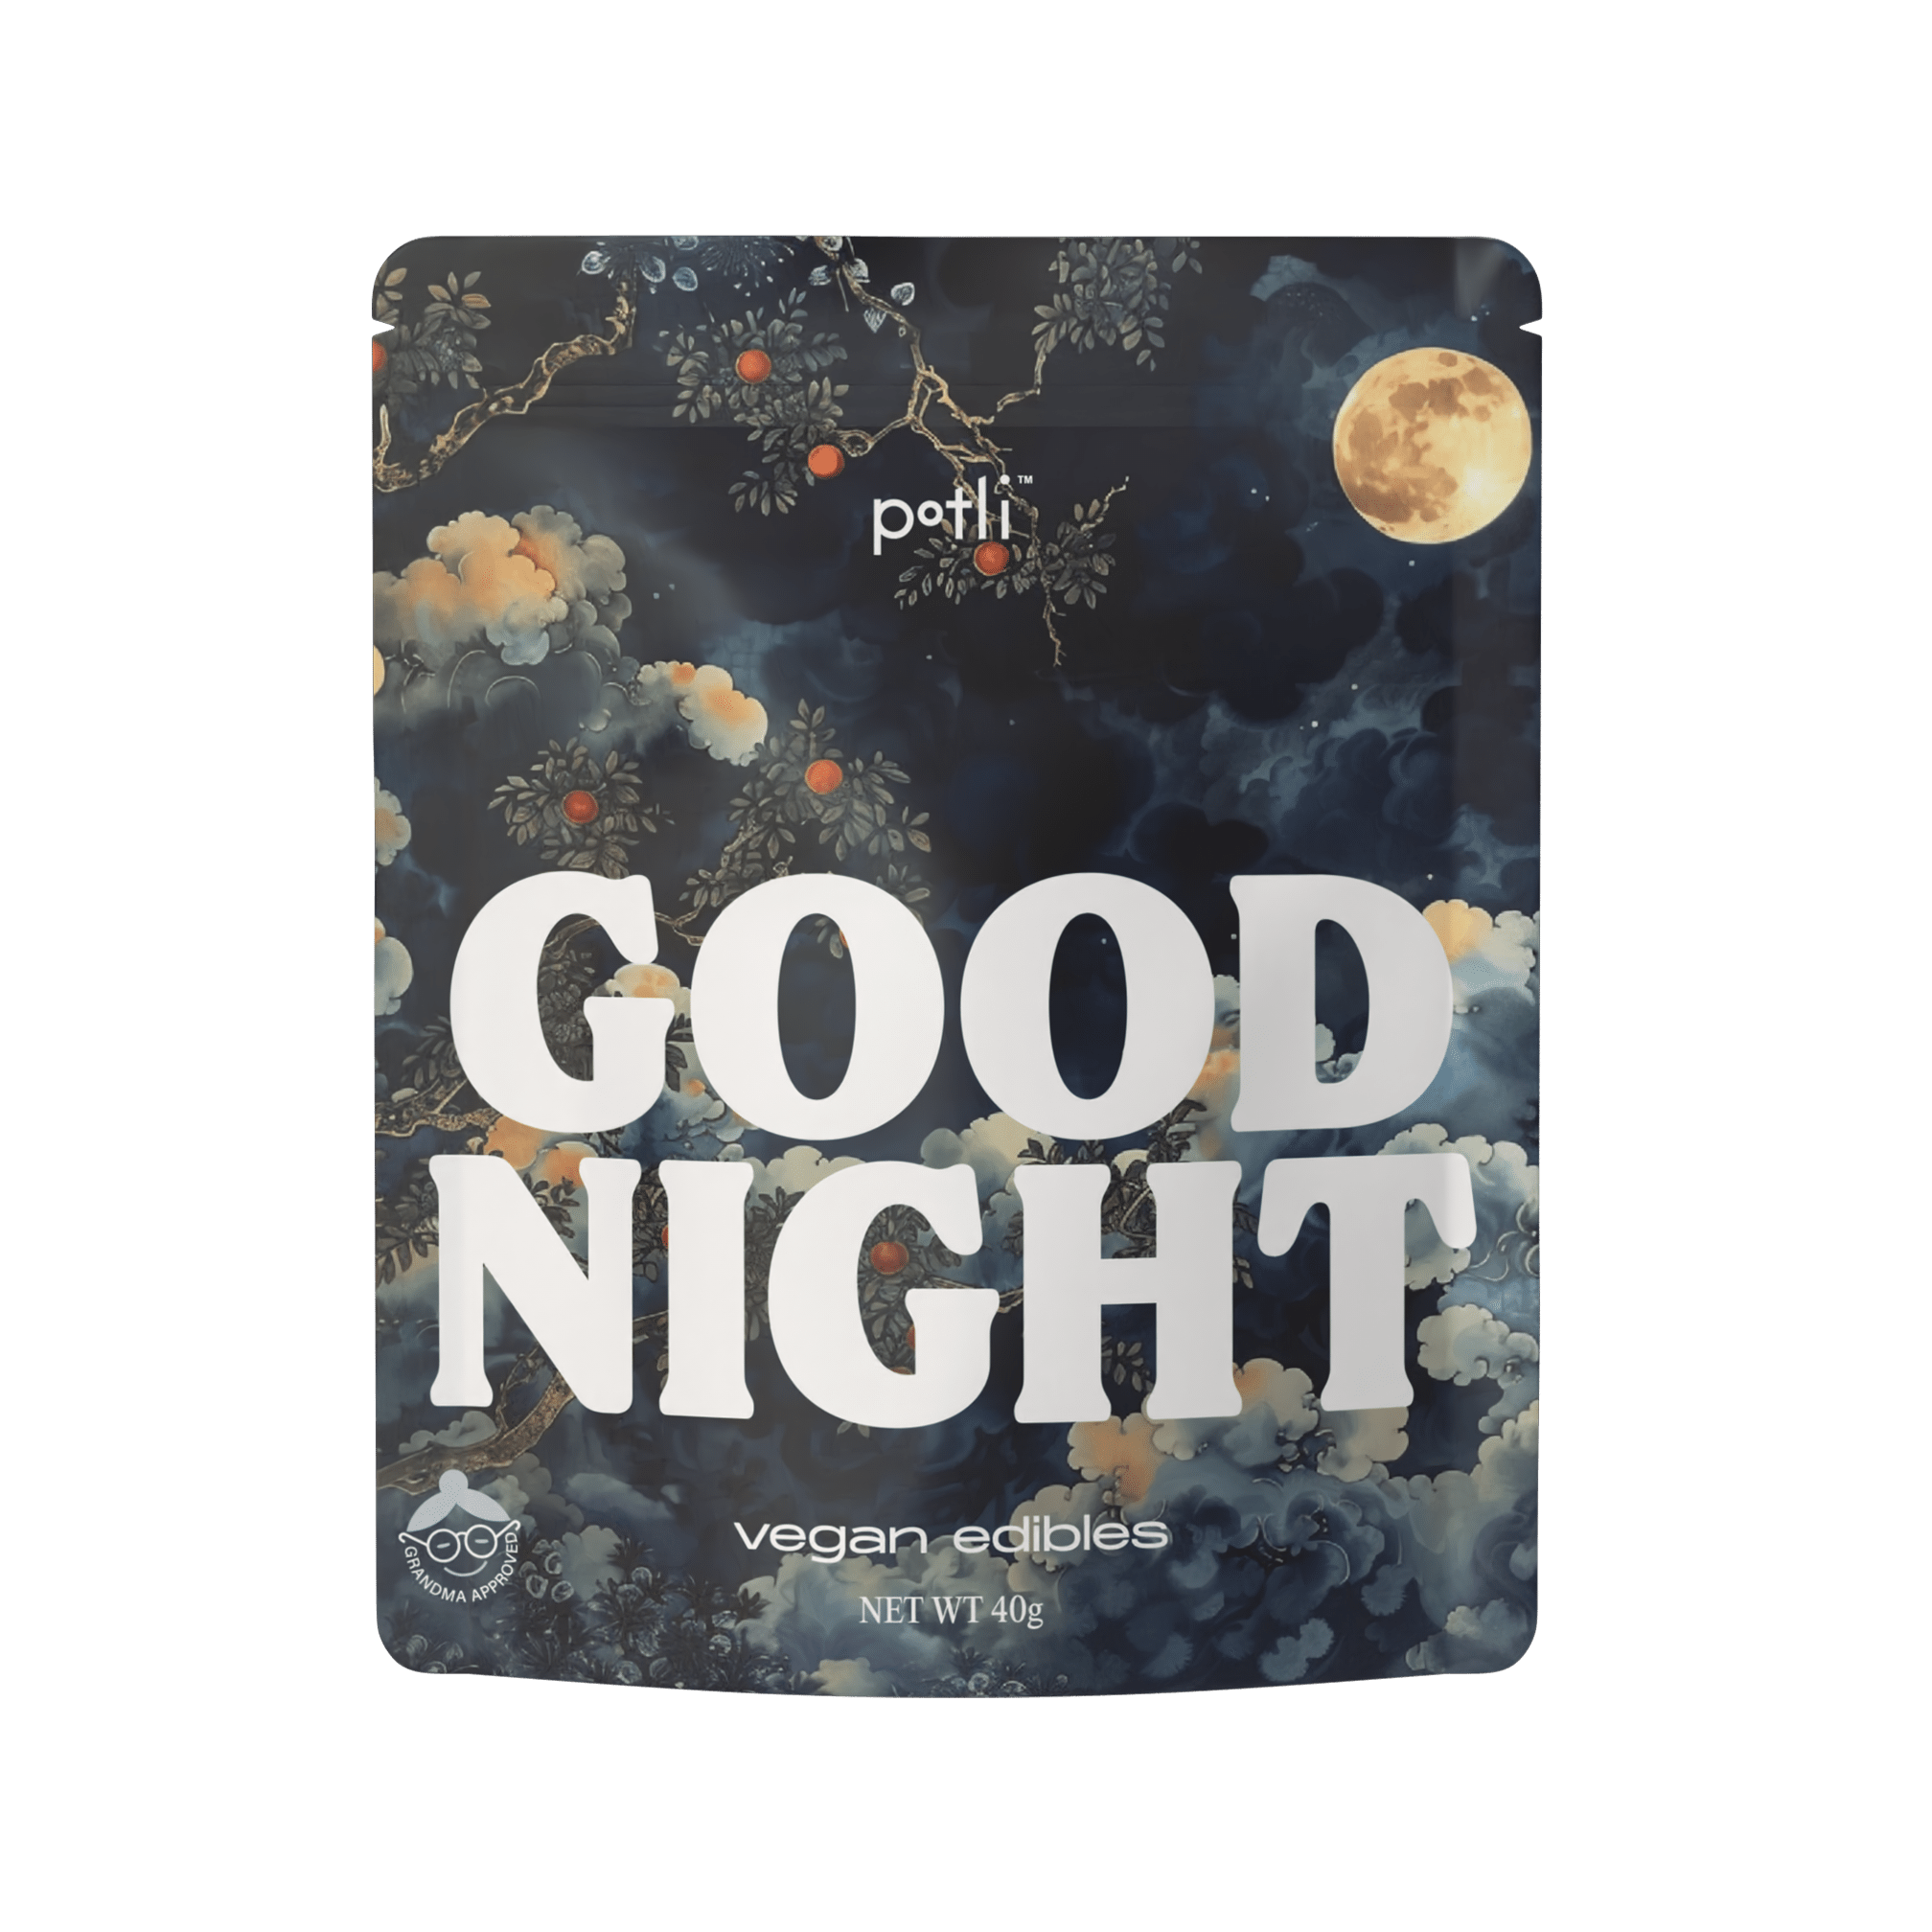 Package design for 'Good Night vegan edibles' with moody, night-time floral and moon graphics.